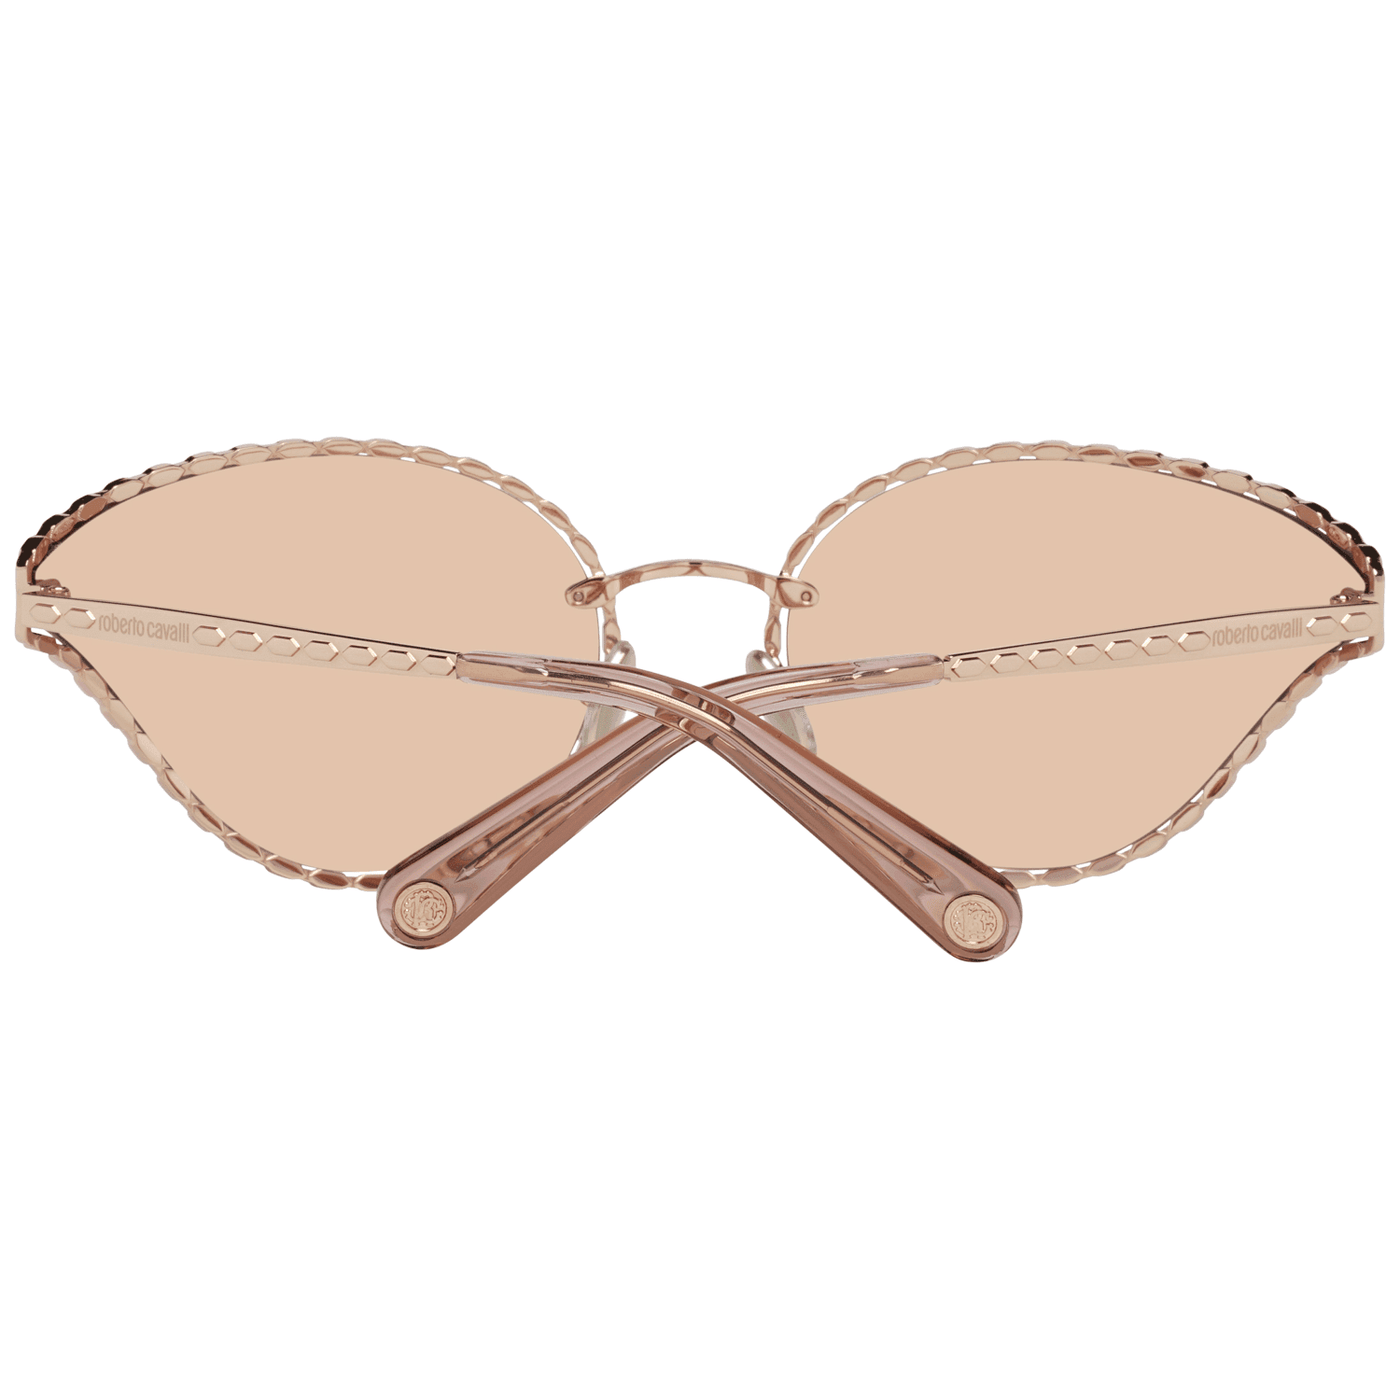 Roberto Cavalli RC1124 Mirrored Oval Sunglasses feed-agegroup-adult, feed-color-Gold, feed-gender-female, Roberto Cavalli, Rose Gold, Sunglasses for Women - Sunglasses at SEYMAYKA